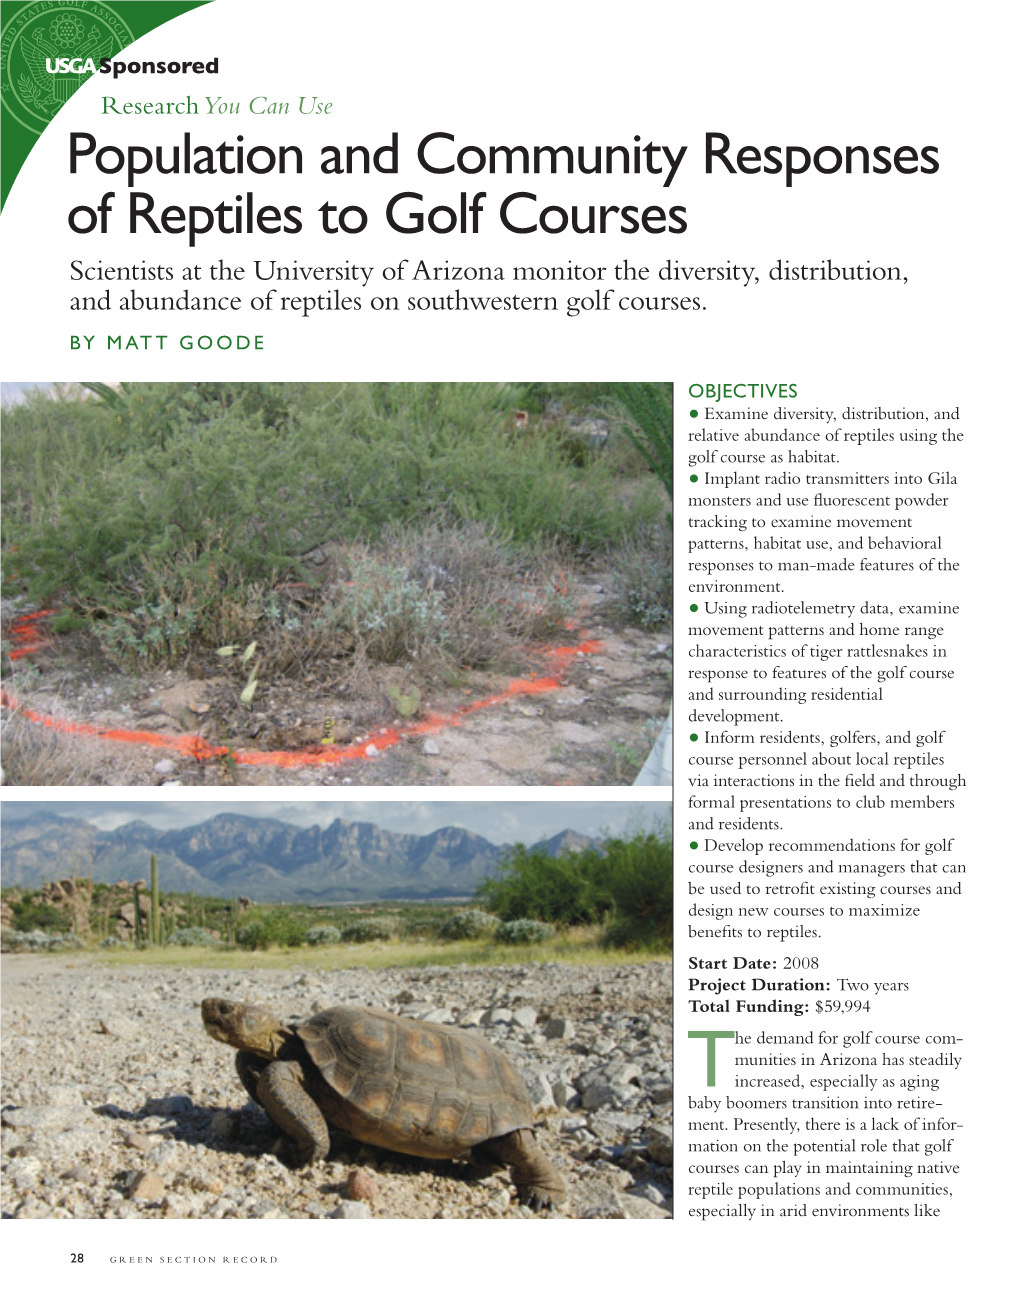 Population and Community Responses of Reptiles to Golf Courses